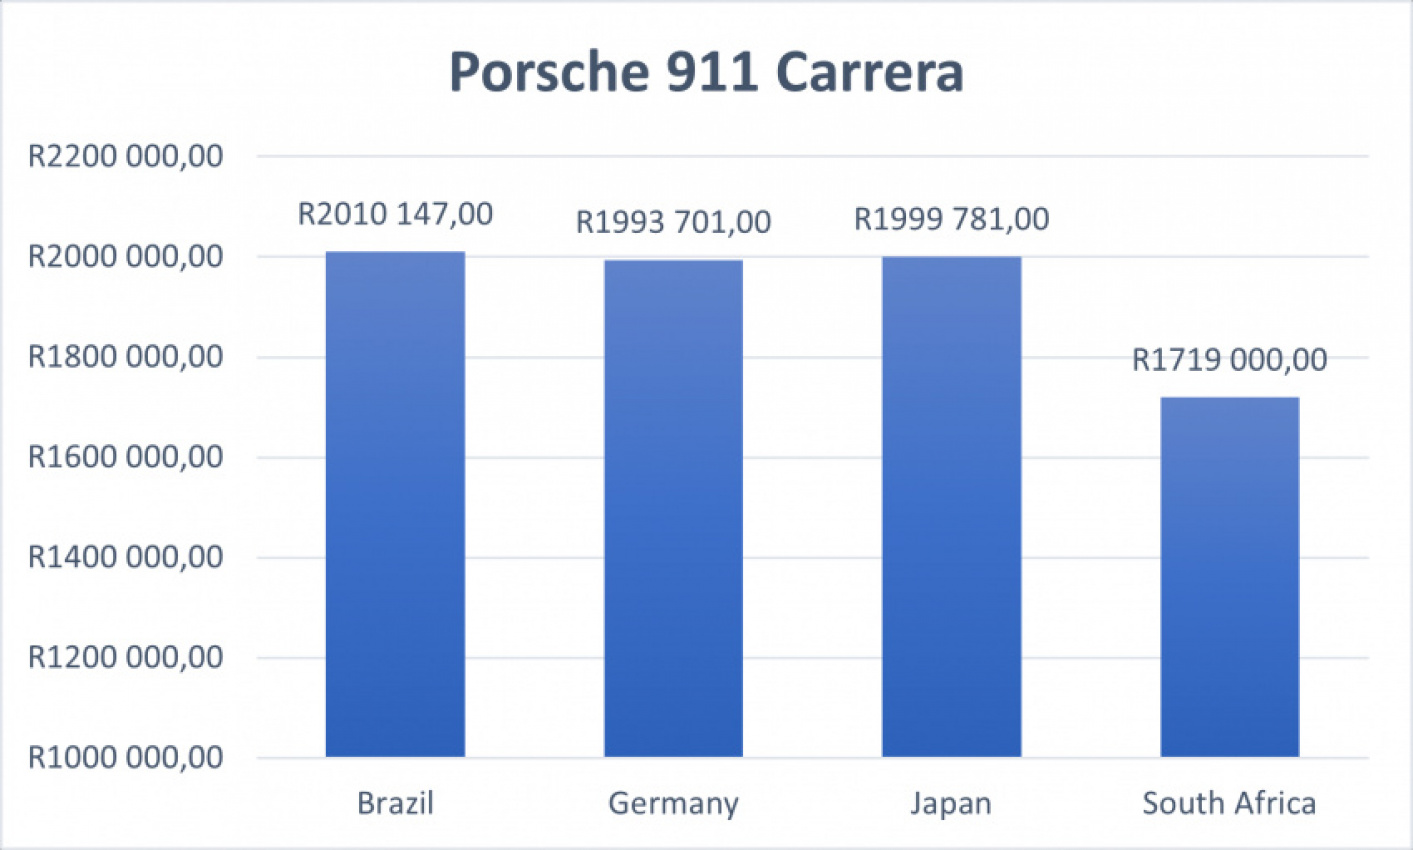 autos, cars, features, bmw, bmw x3, mercedes-benz, mercedes-benz c-class, porsche, porsche 911 carrera, toyota, toyota hilux, volkswagen, vw polo, how south africa’s car prices compare to brazil, germany, and japan